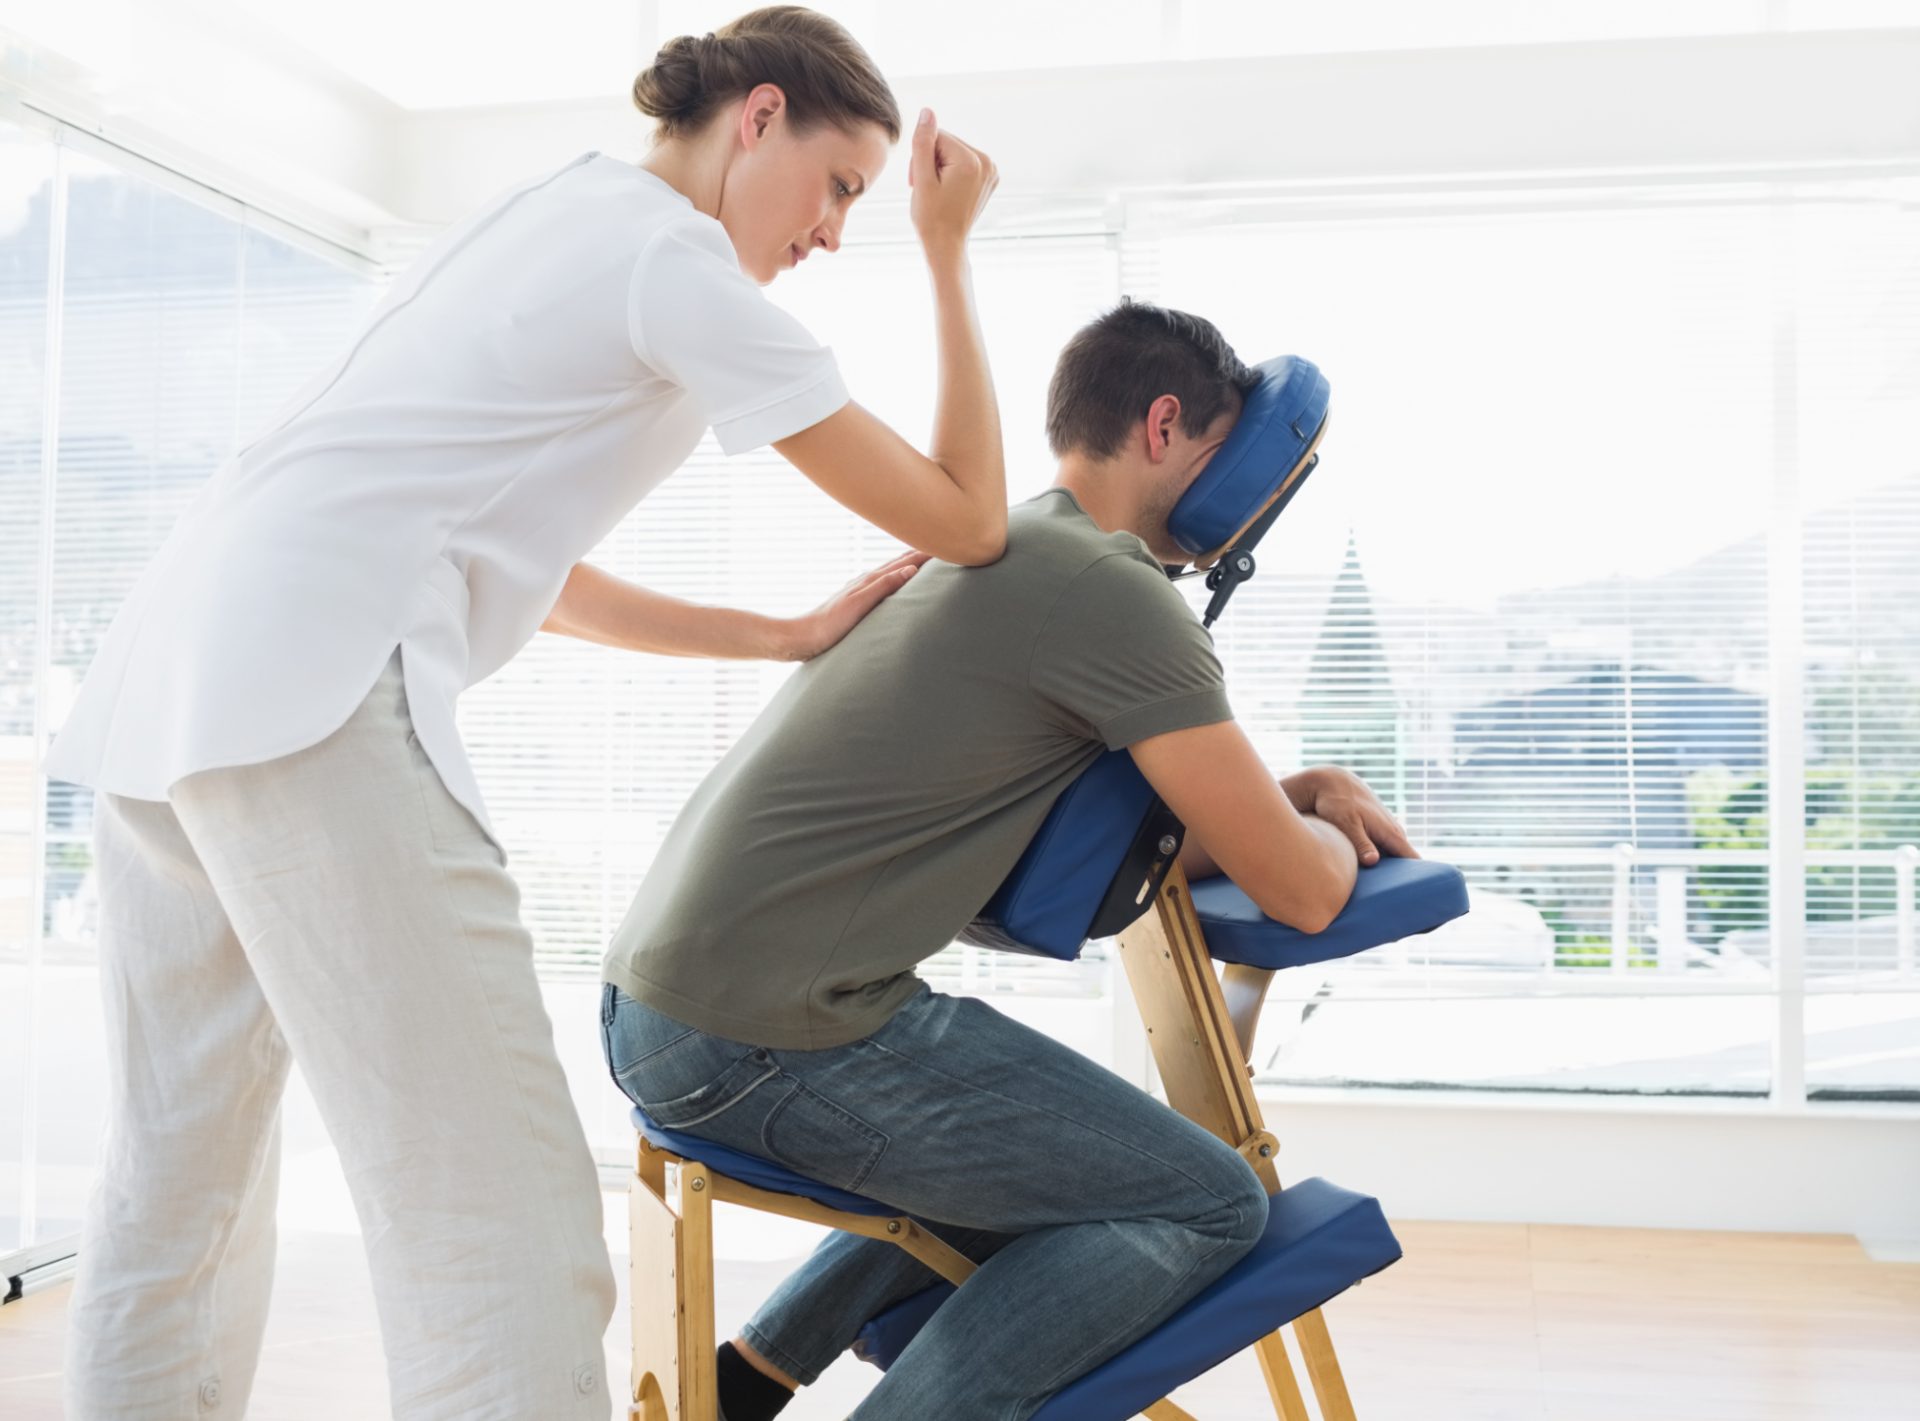 From to Table: Chair Massage Clients